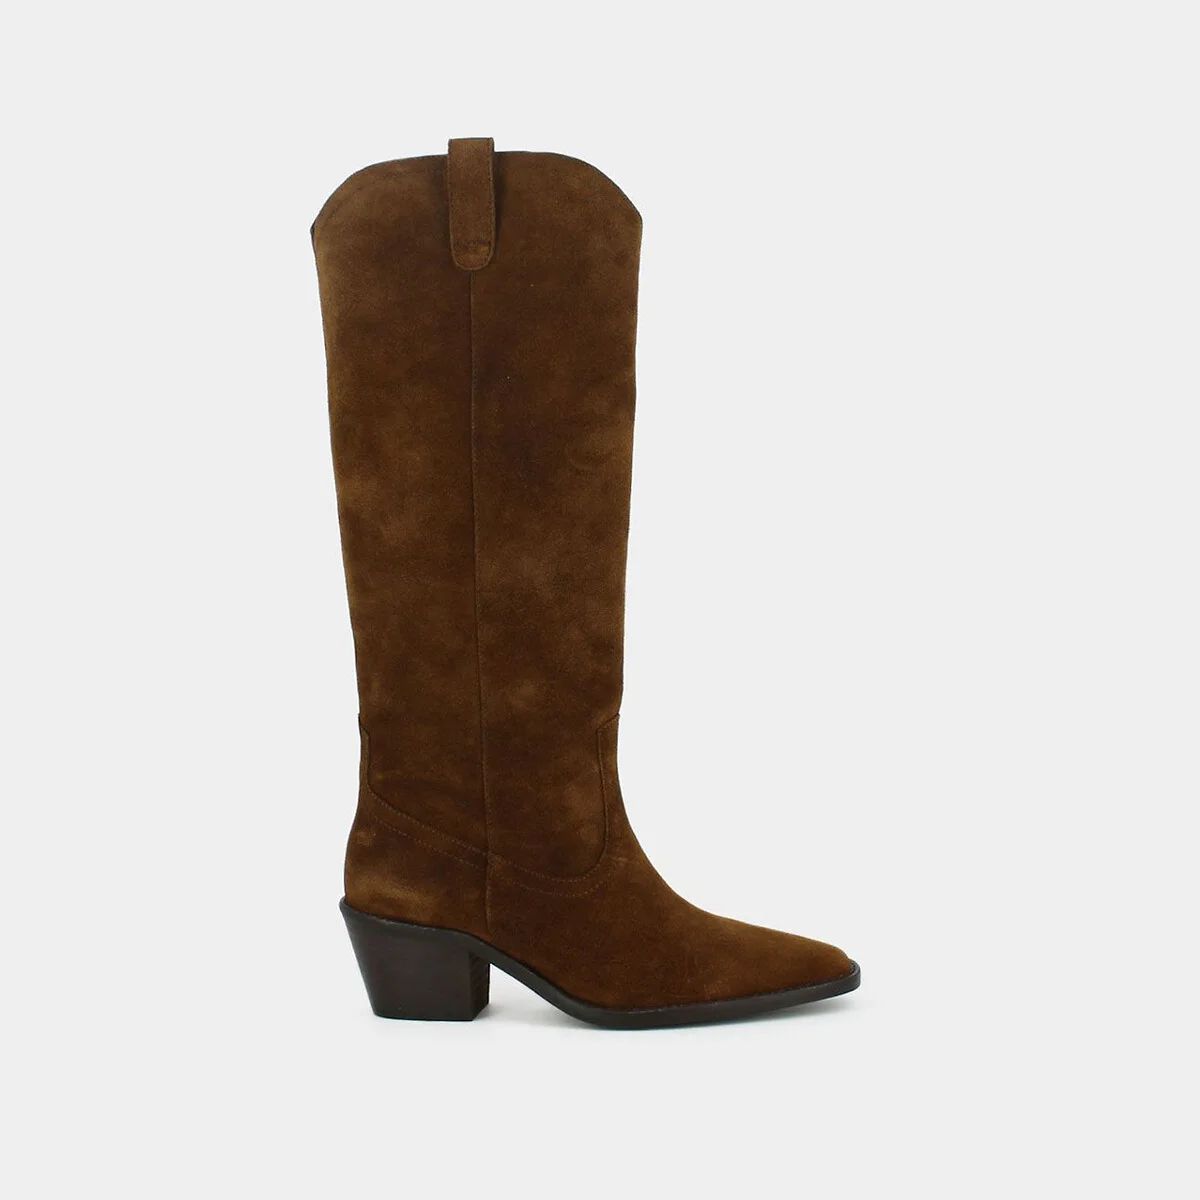 Suede Knee-High Boots with Pointed Toe and Cuban Heel | La Redoute (UK)